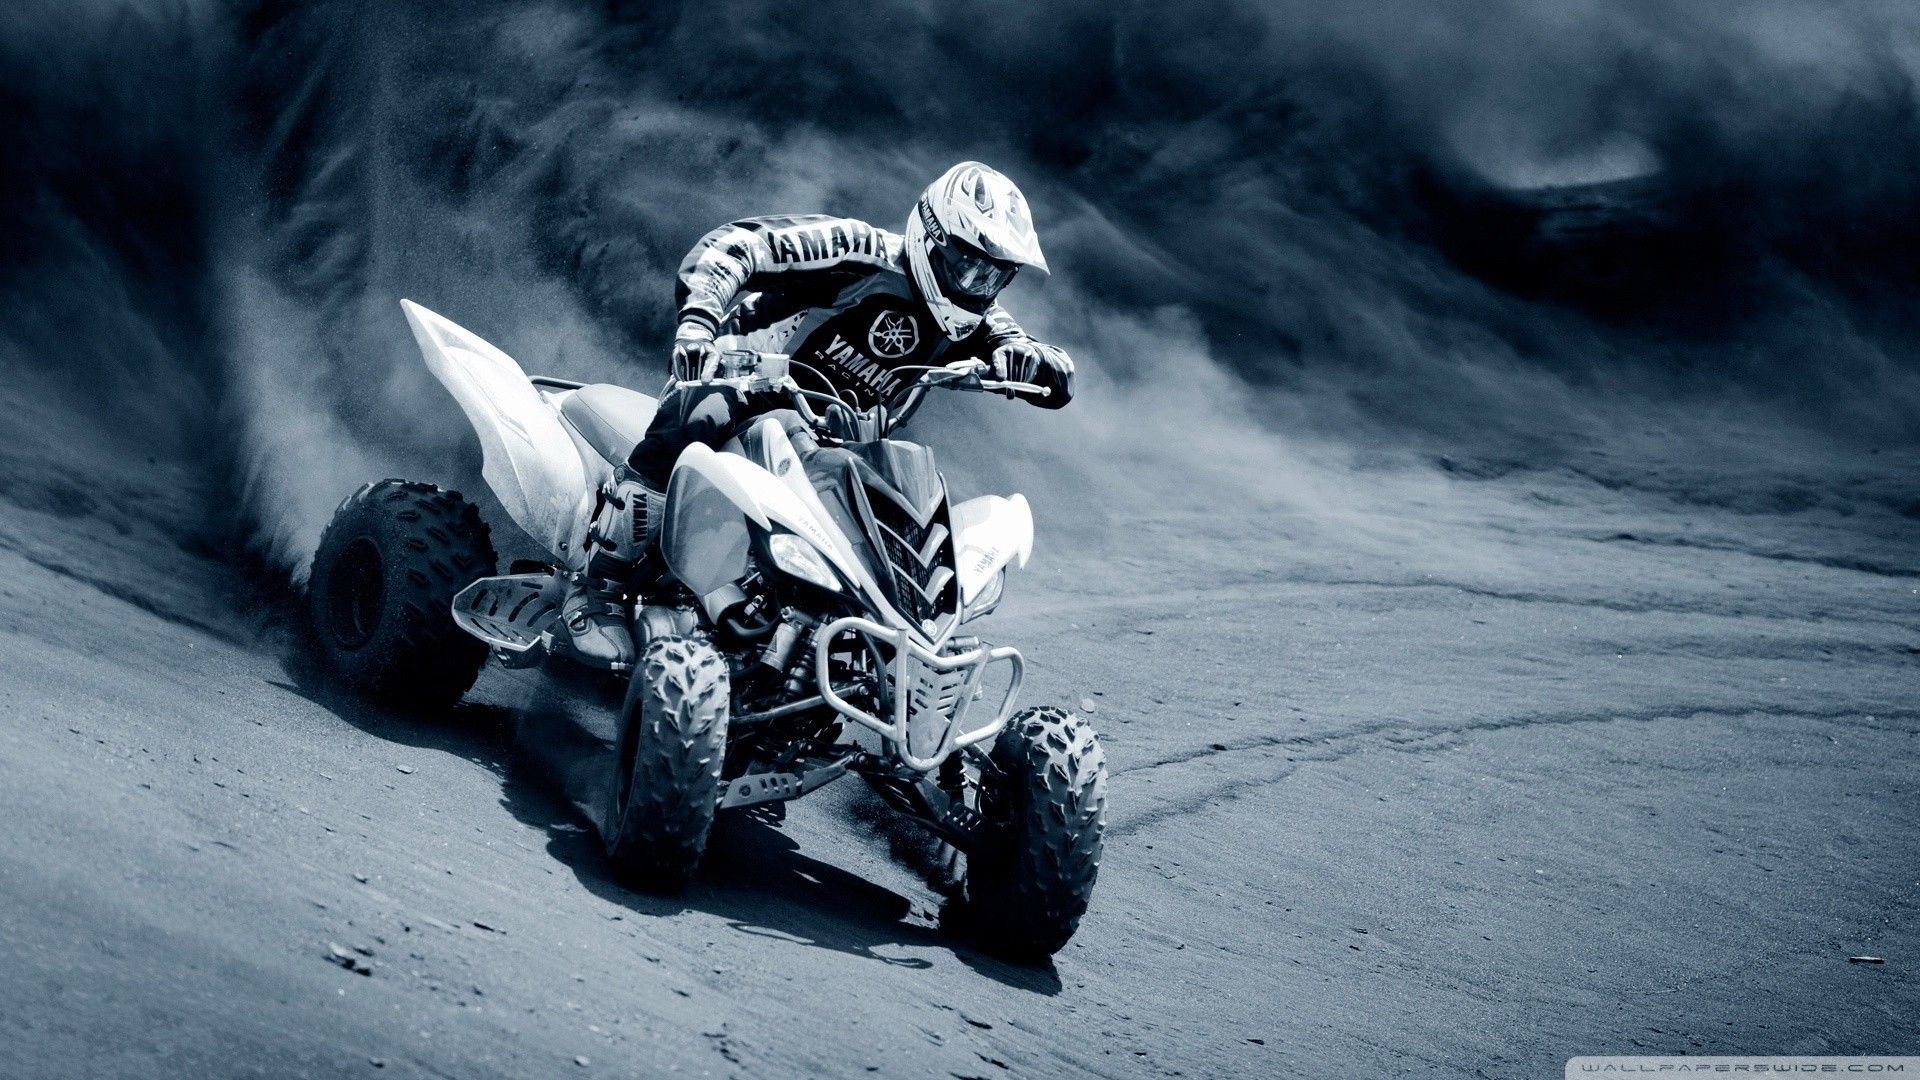 Wallpaper, motorcycle, vehicle, racing, off road, screenshot, black and white, monochrome photography 1920x1080